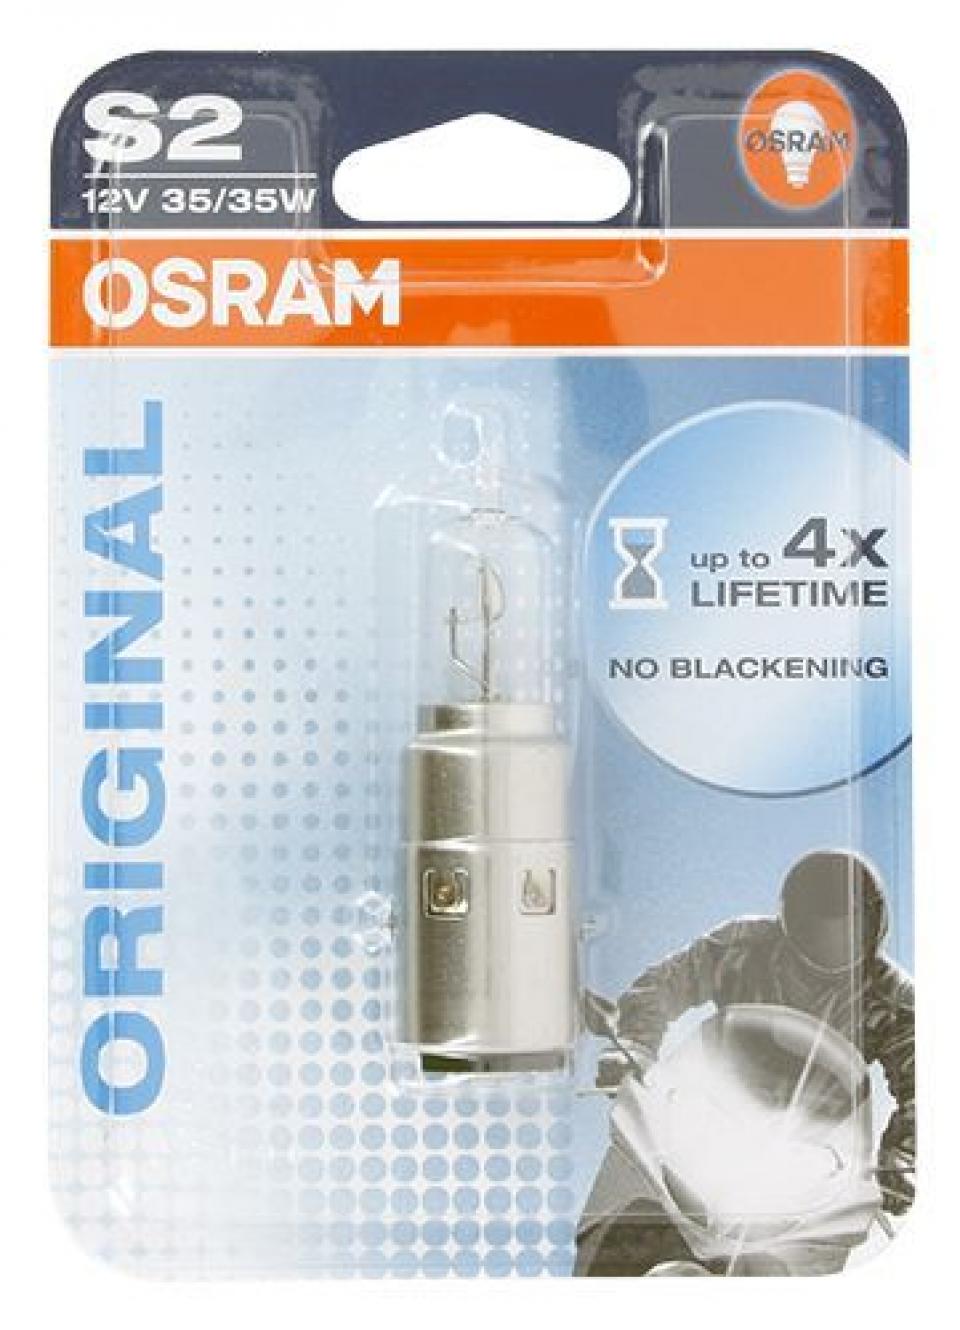 Ampoule Osram pour Scooter MBK 50 Stunt Naked 2005 à 2012 Neuf